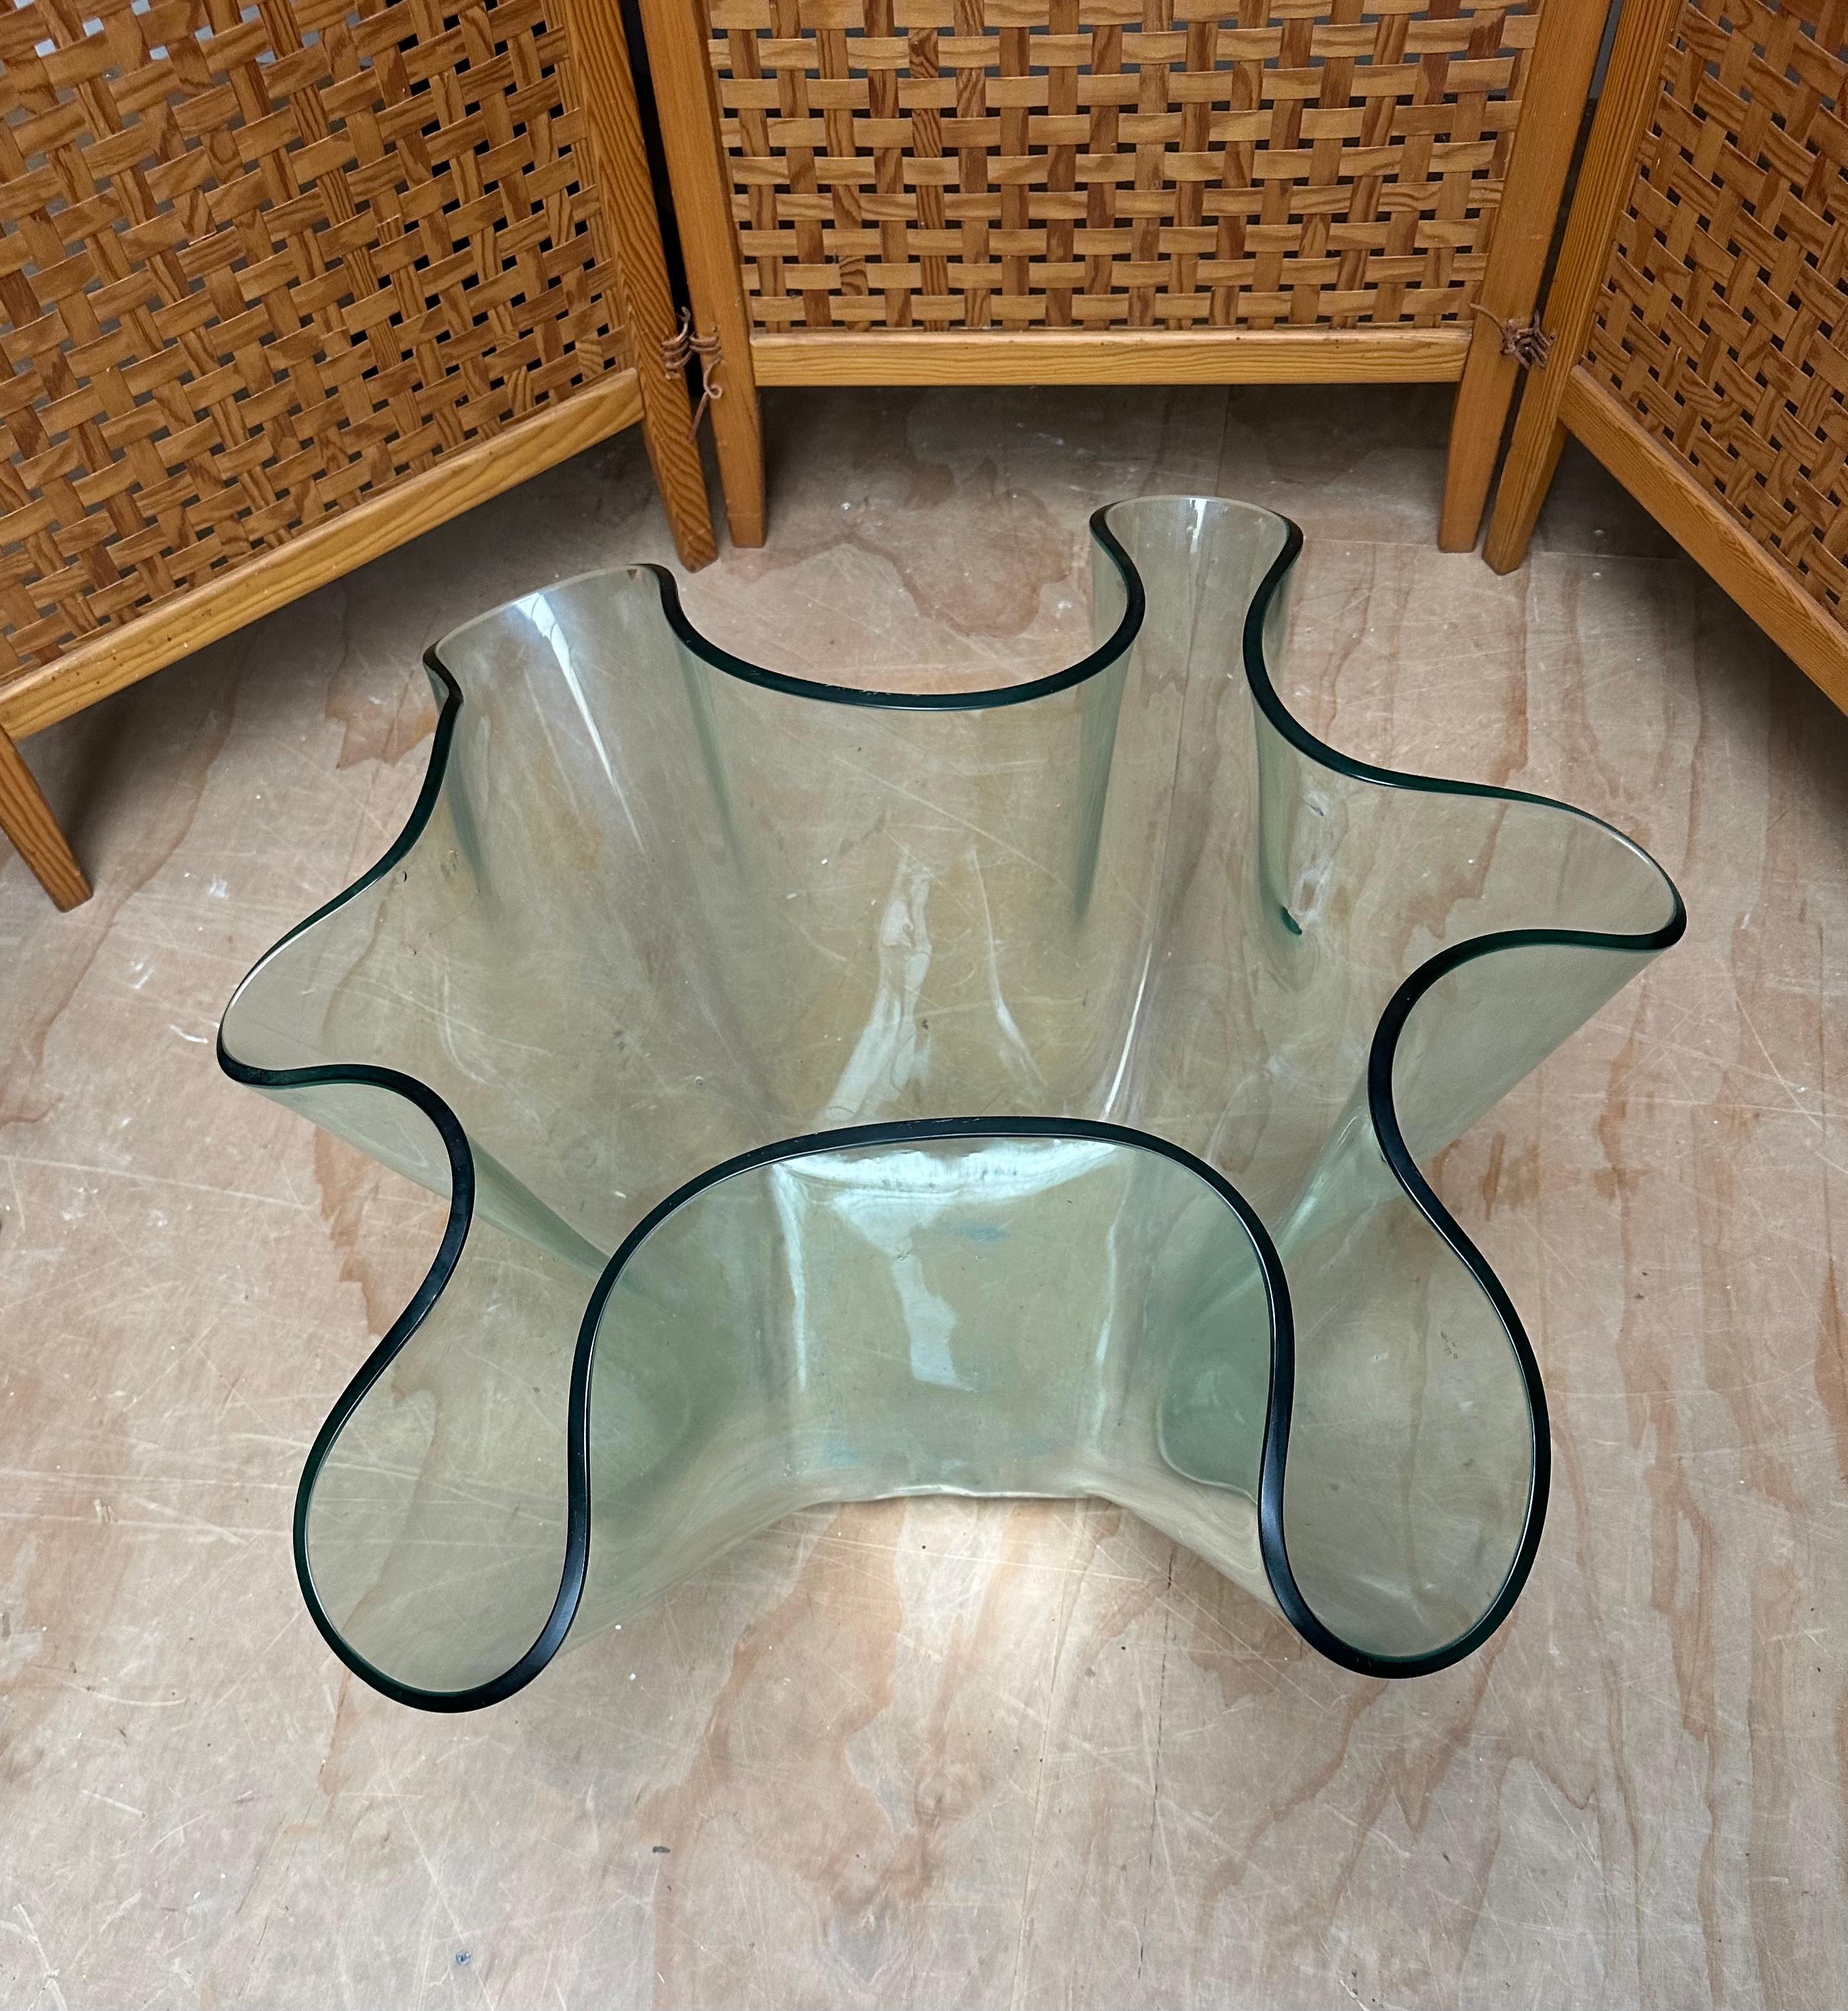 Exceptional Strong & Thick Curved Design Murano, Glass Art Floor Jardiniere Vase For Sale 6